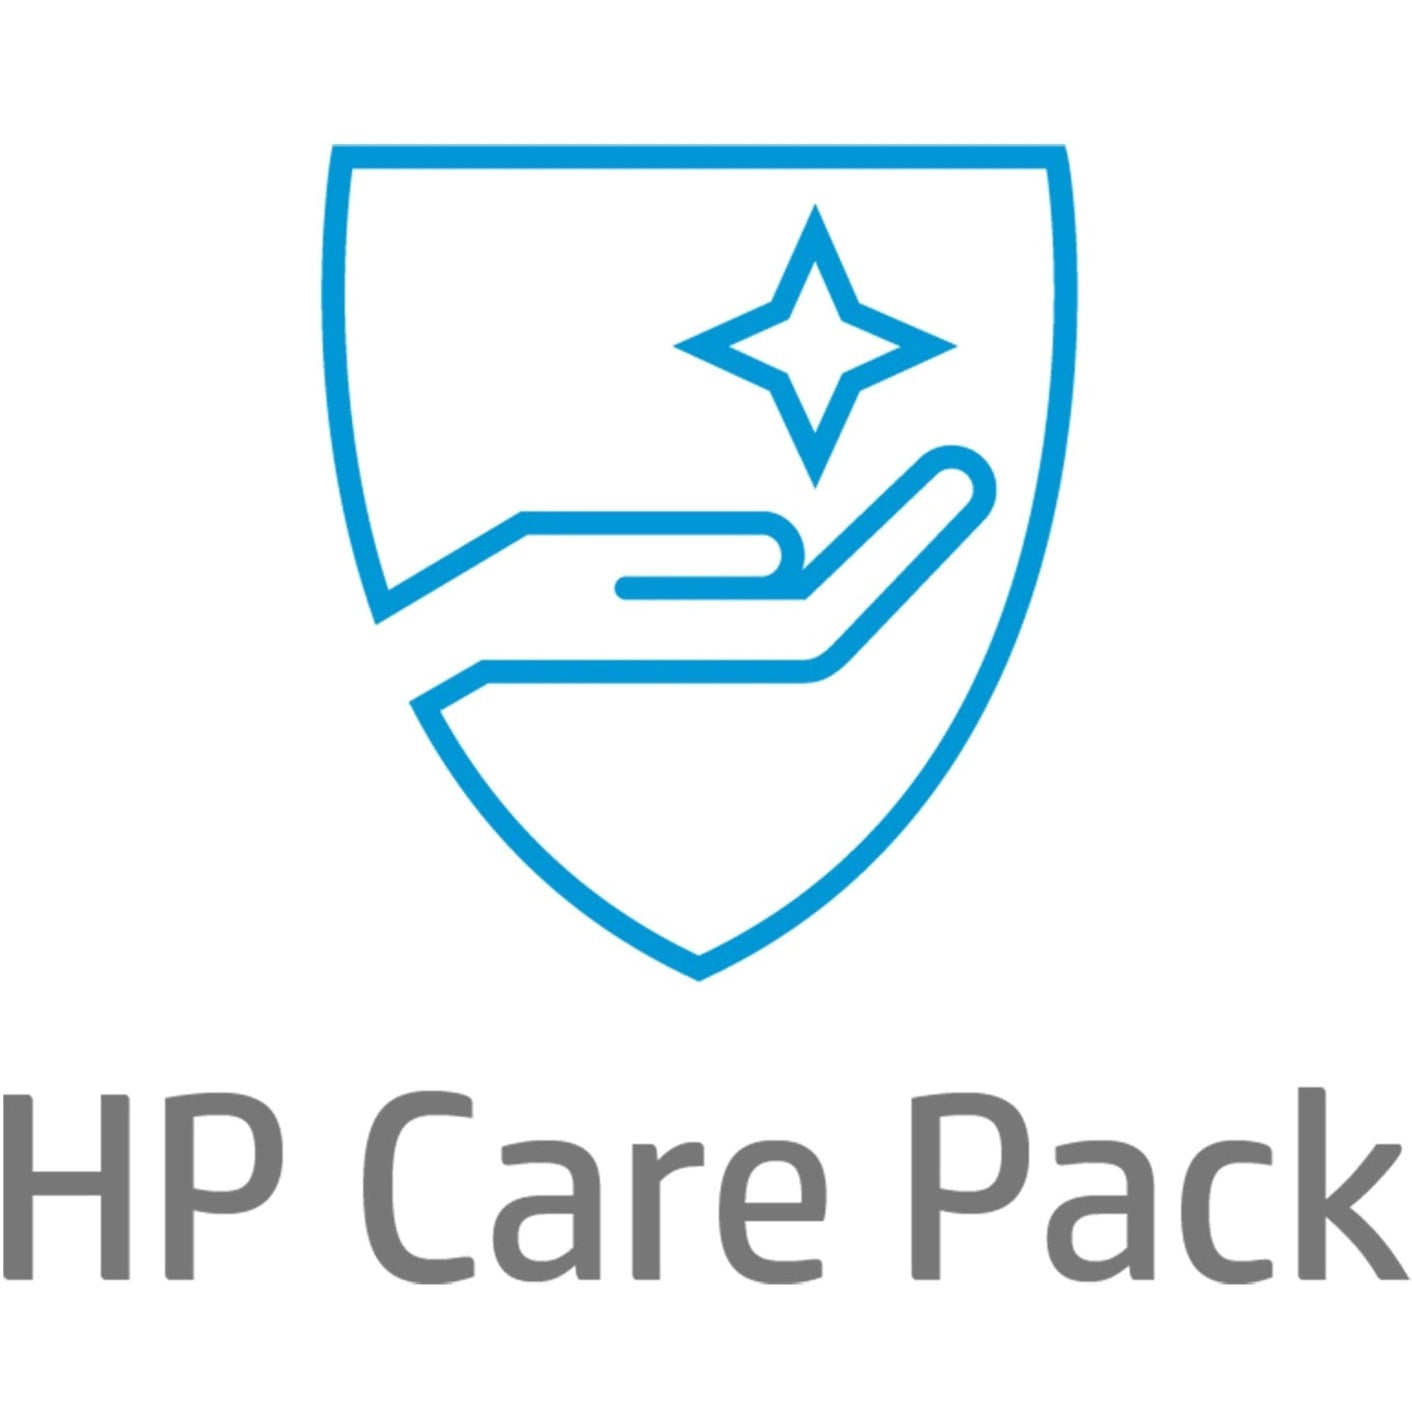 HP Care Pack - Extended Service - 3 Year - Service (U9BA7E)